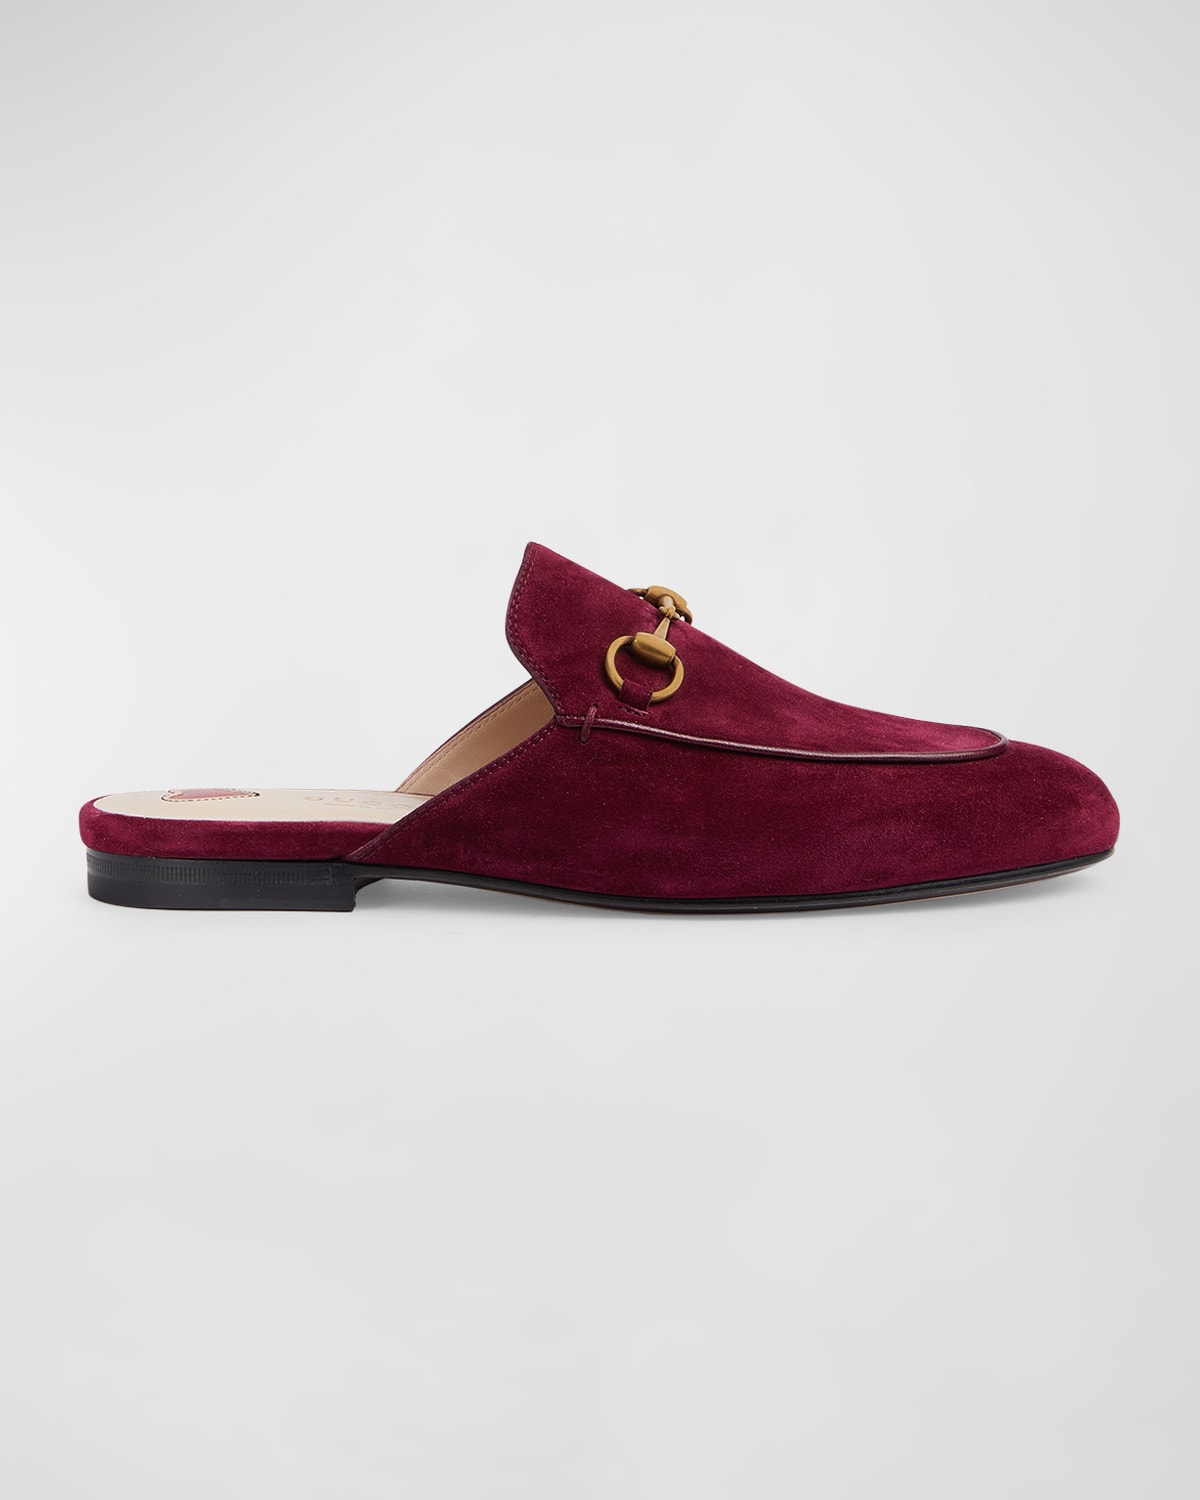 Princetown Suede Loafer Mules